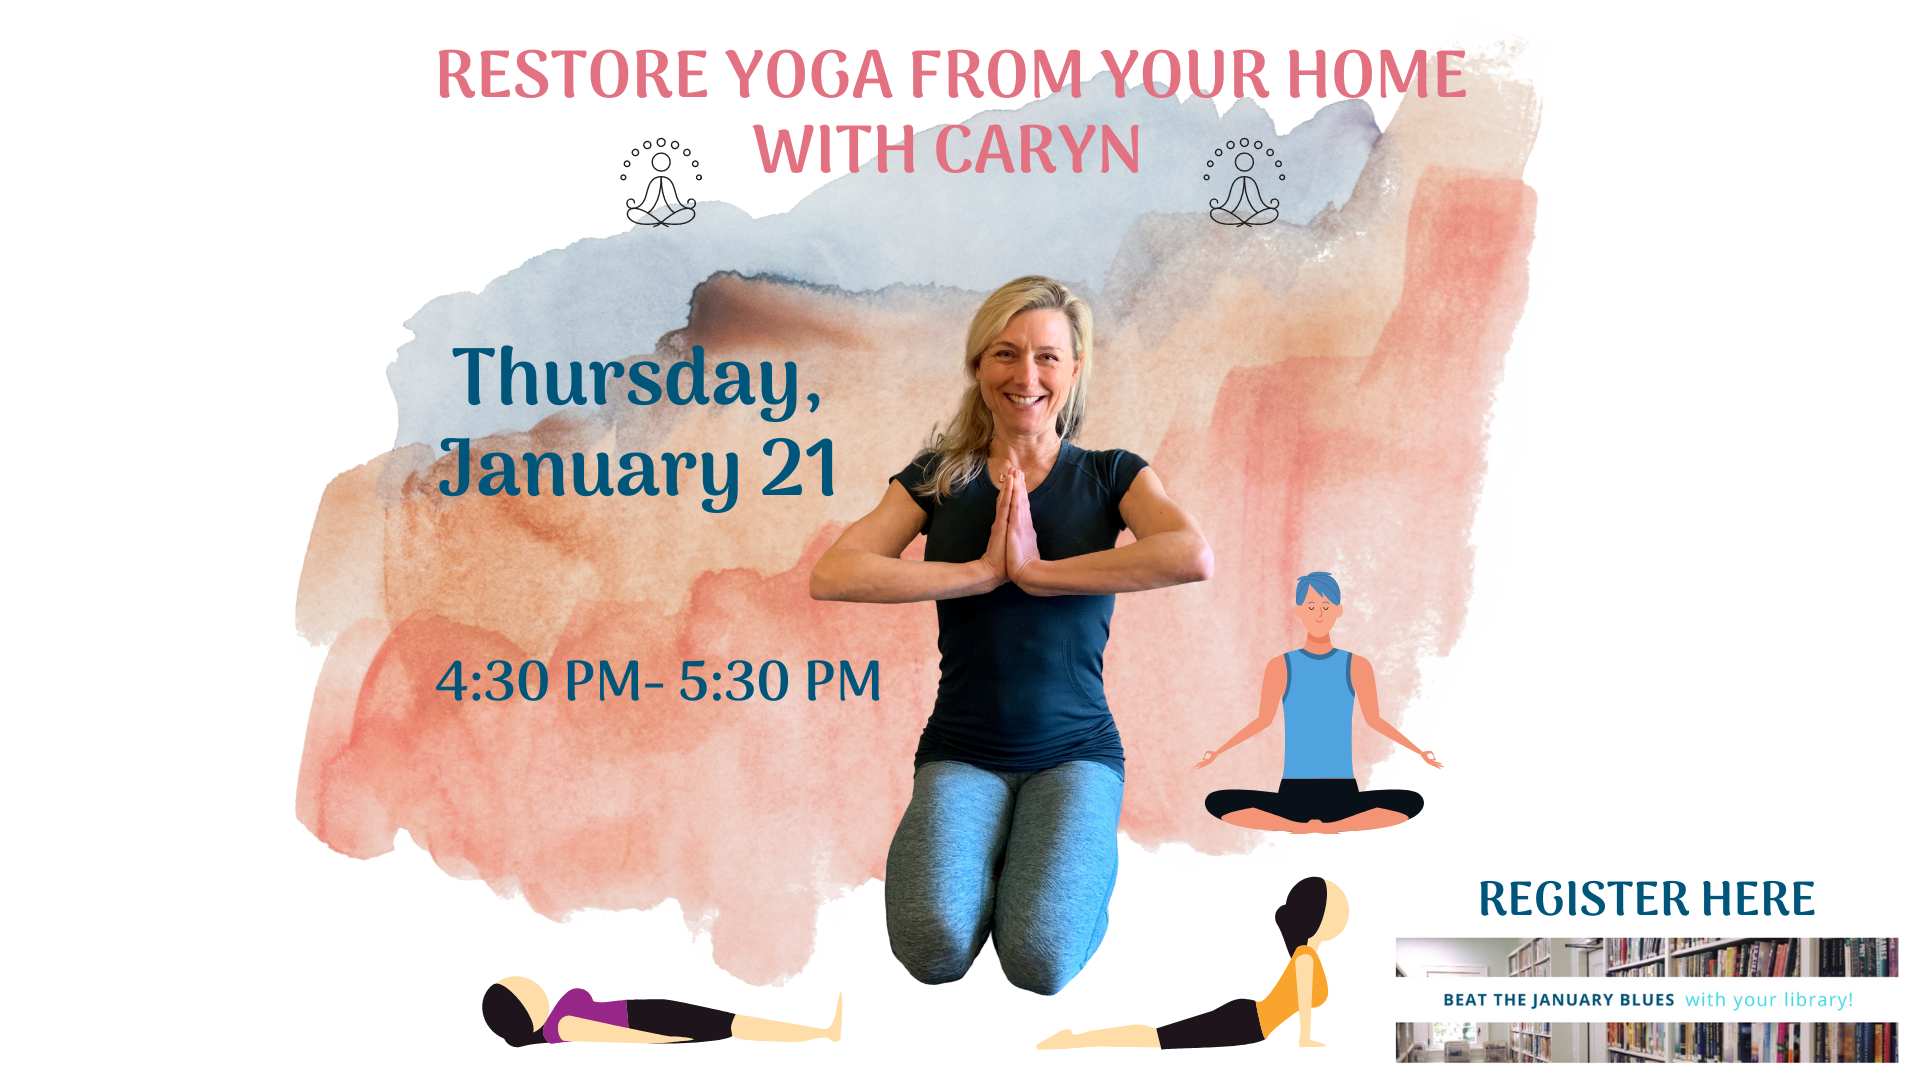 CAROUSEL Restore Yoga from your Home with Caryn 21.01.21.png